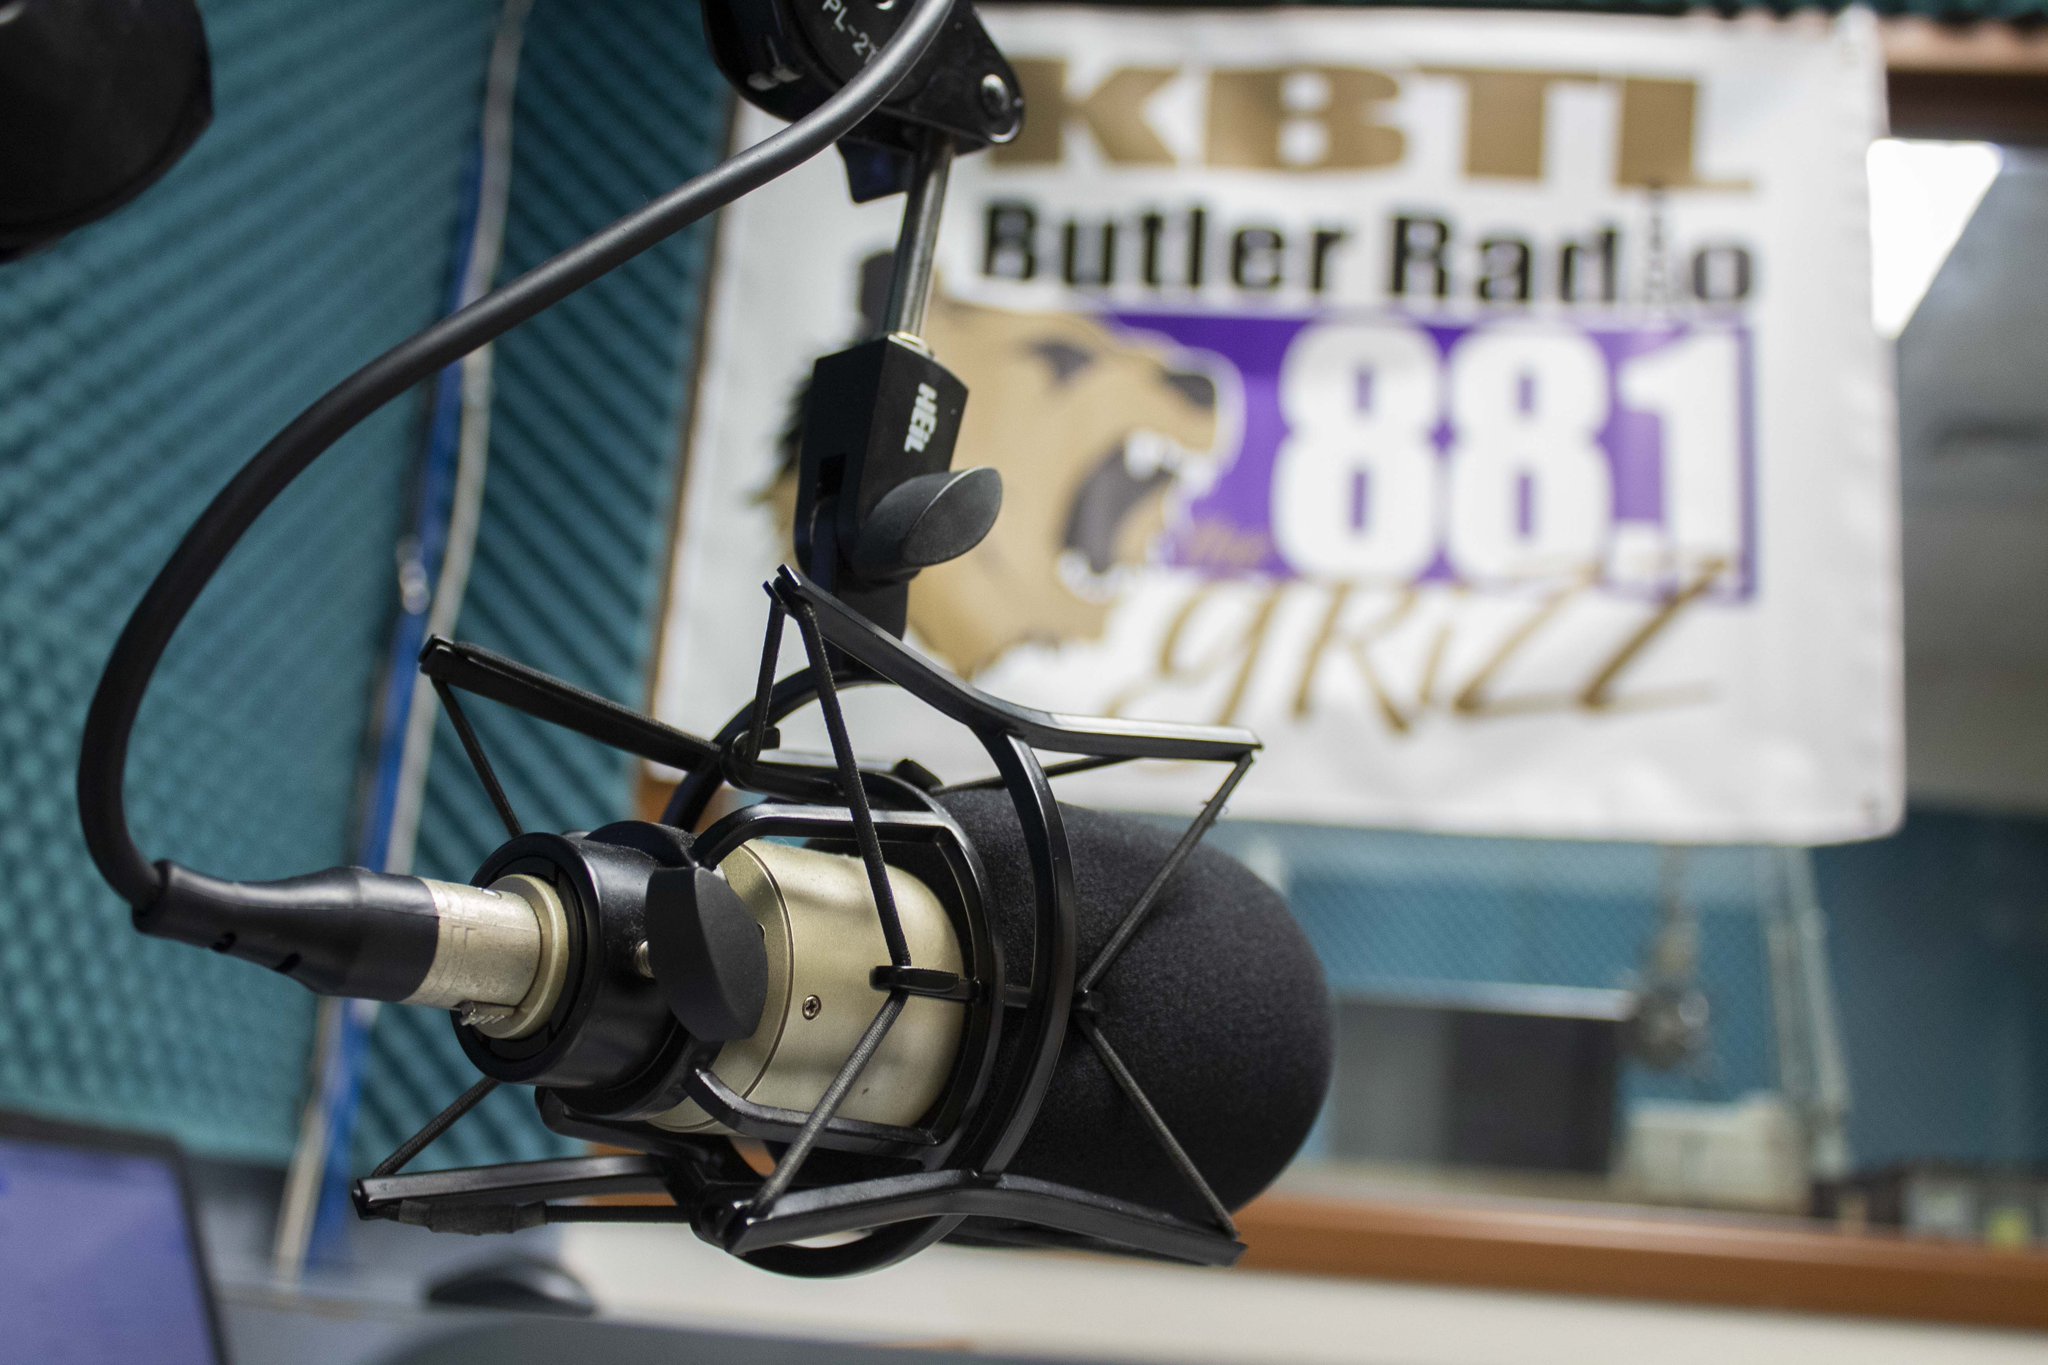 College radio is an “opportunity” for those who do it